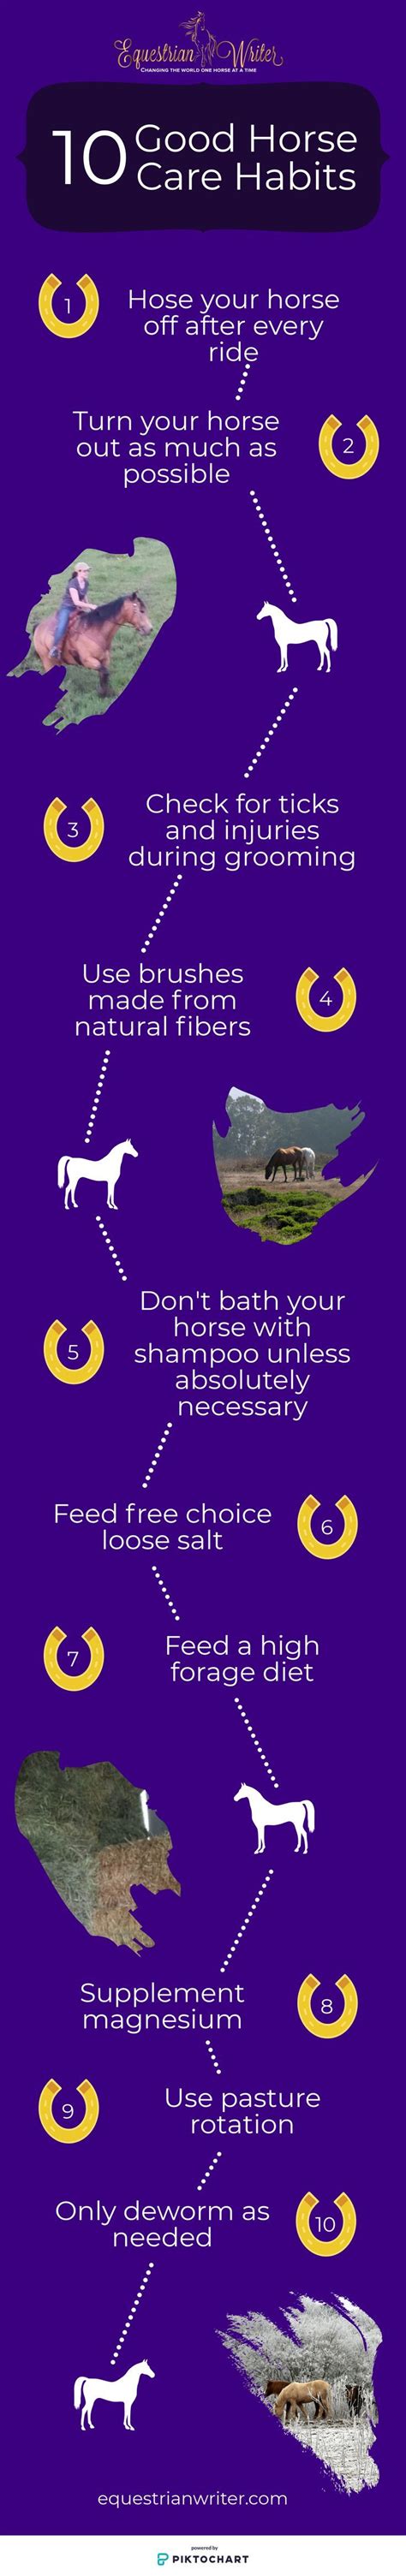 Top 10 Good Horse Care Habits | Horse care, Horse care tips, Horses